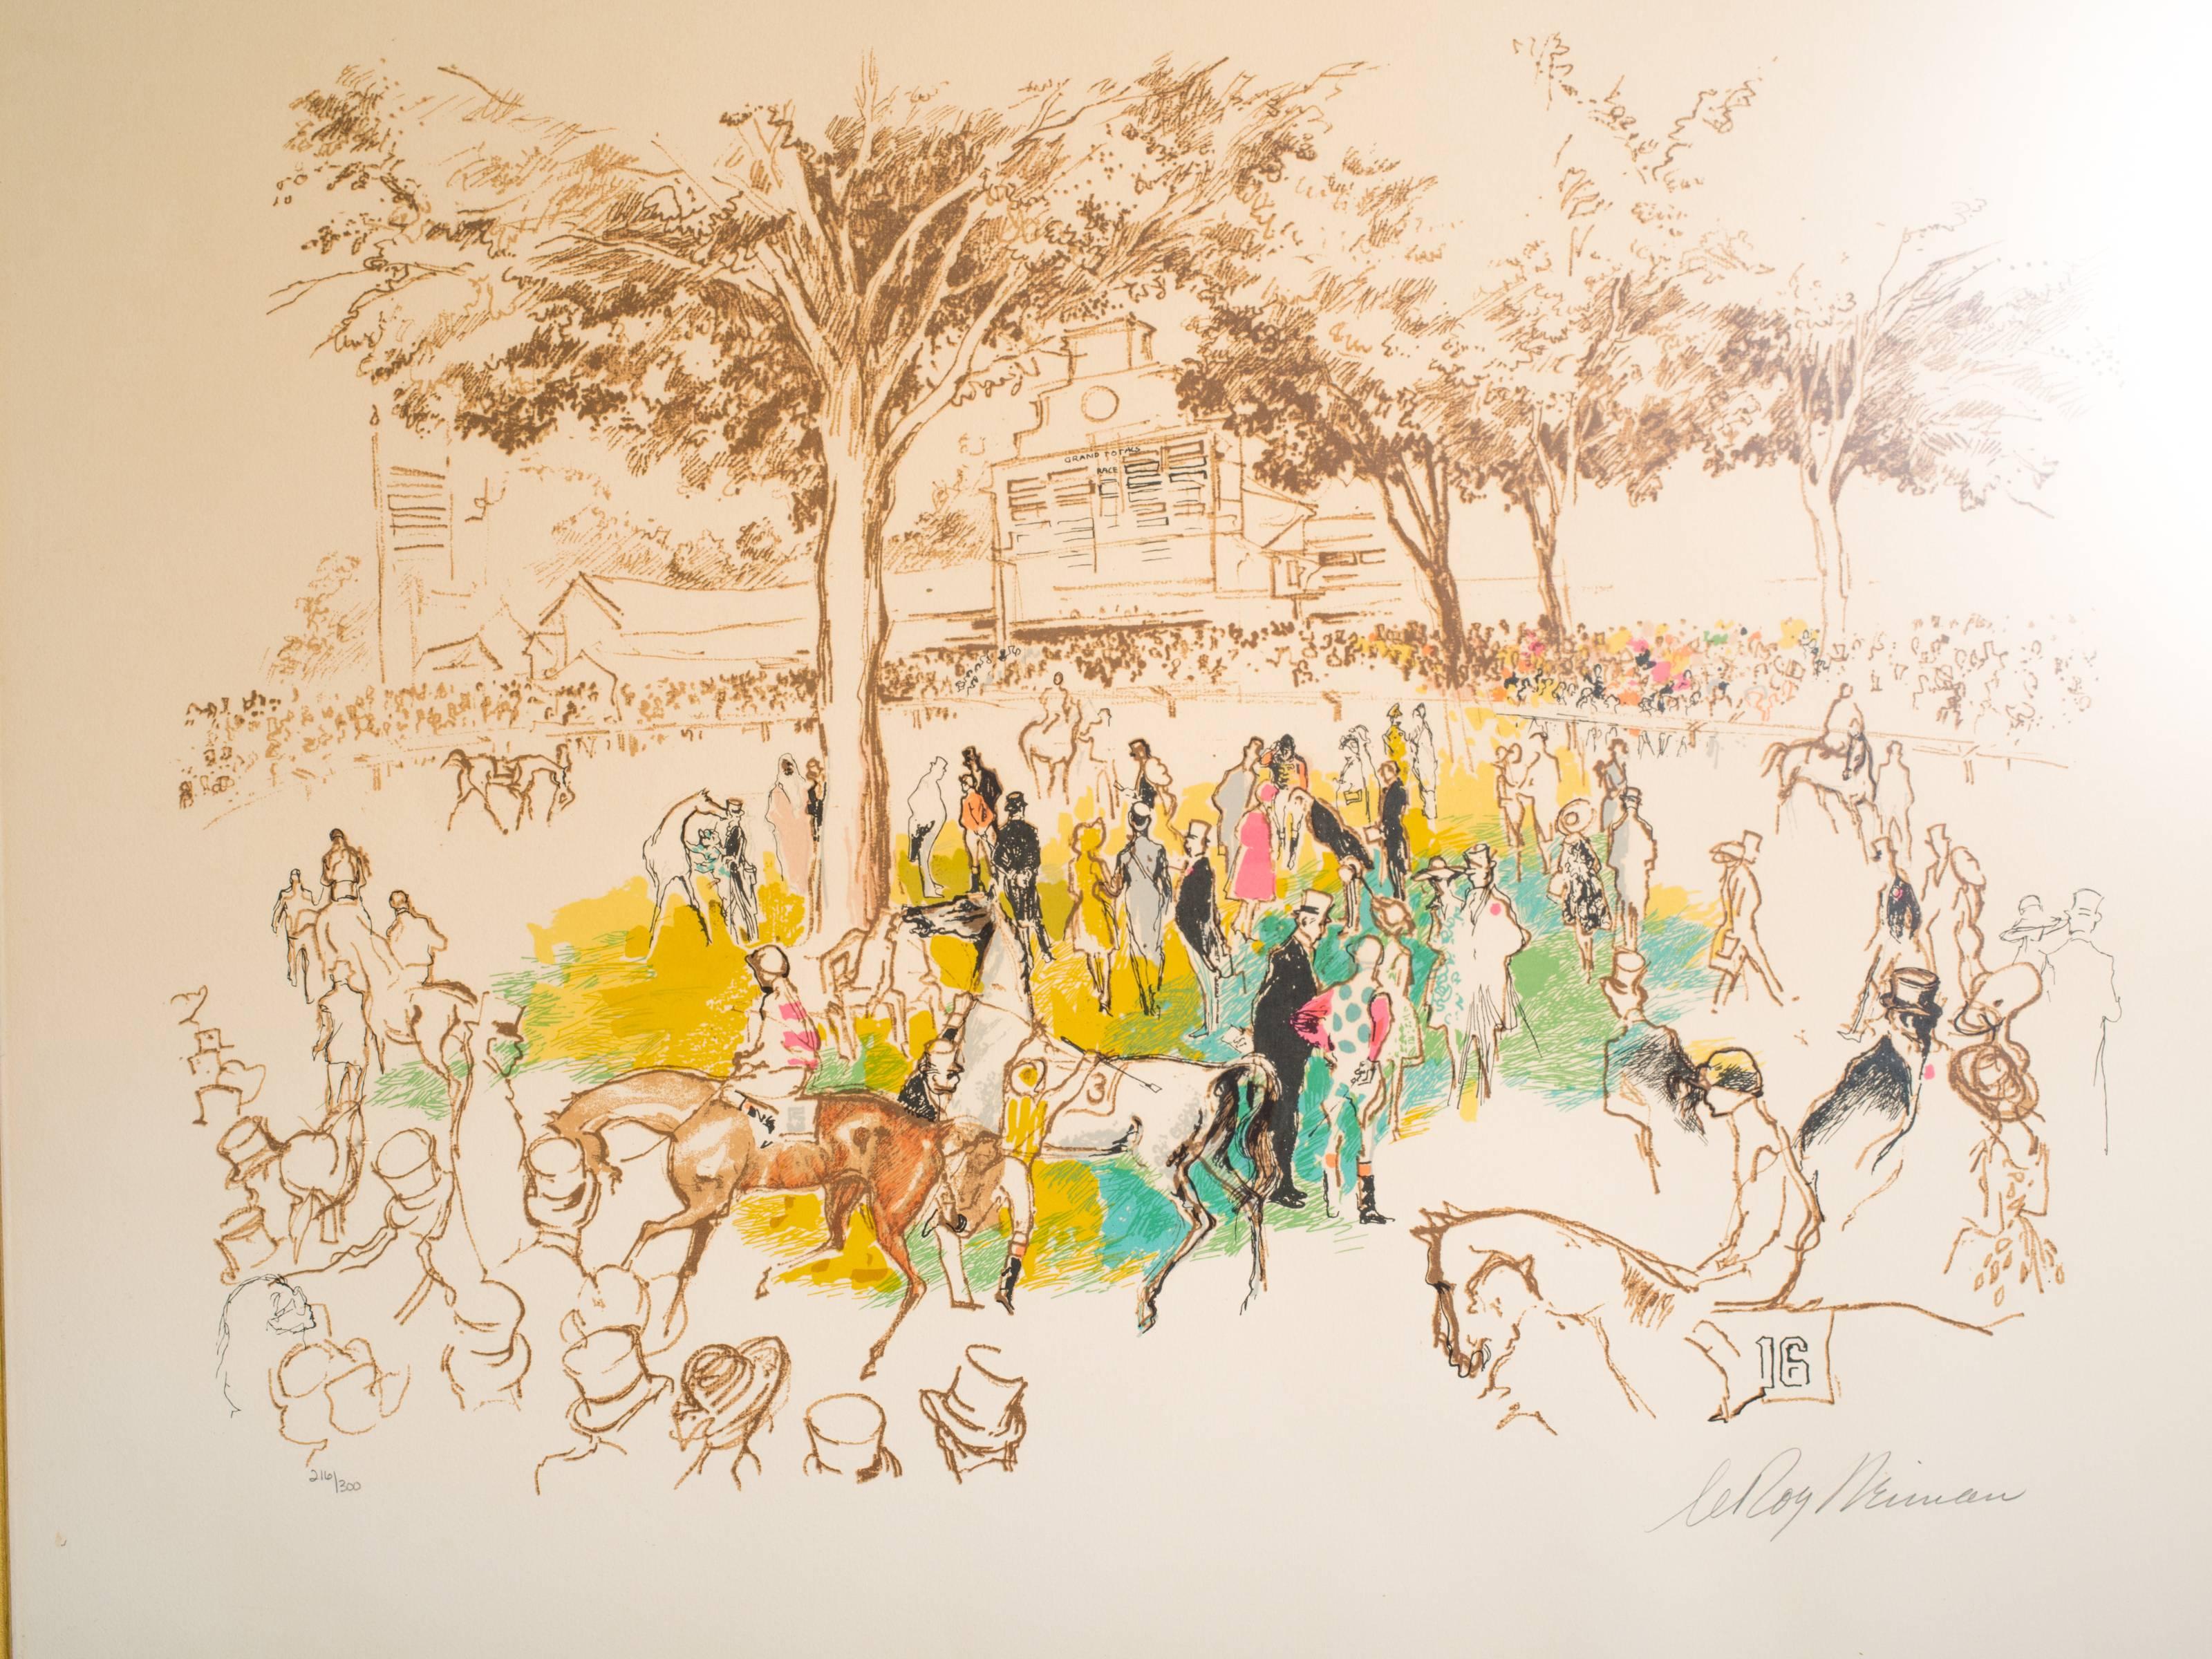 Large size LeRoy Neiman pencil signed and numbered horse race serigraph. Original frame with sun proof glass. Numbered 216/300.